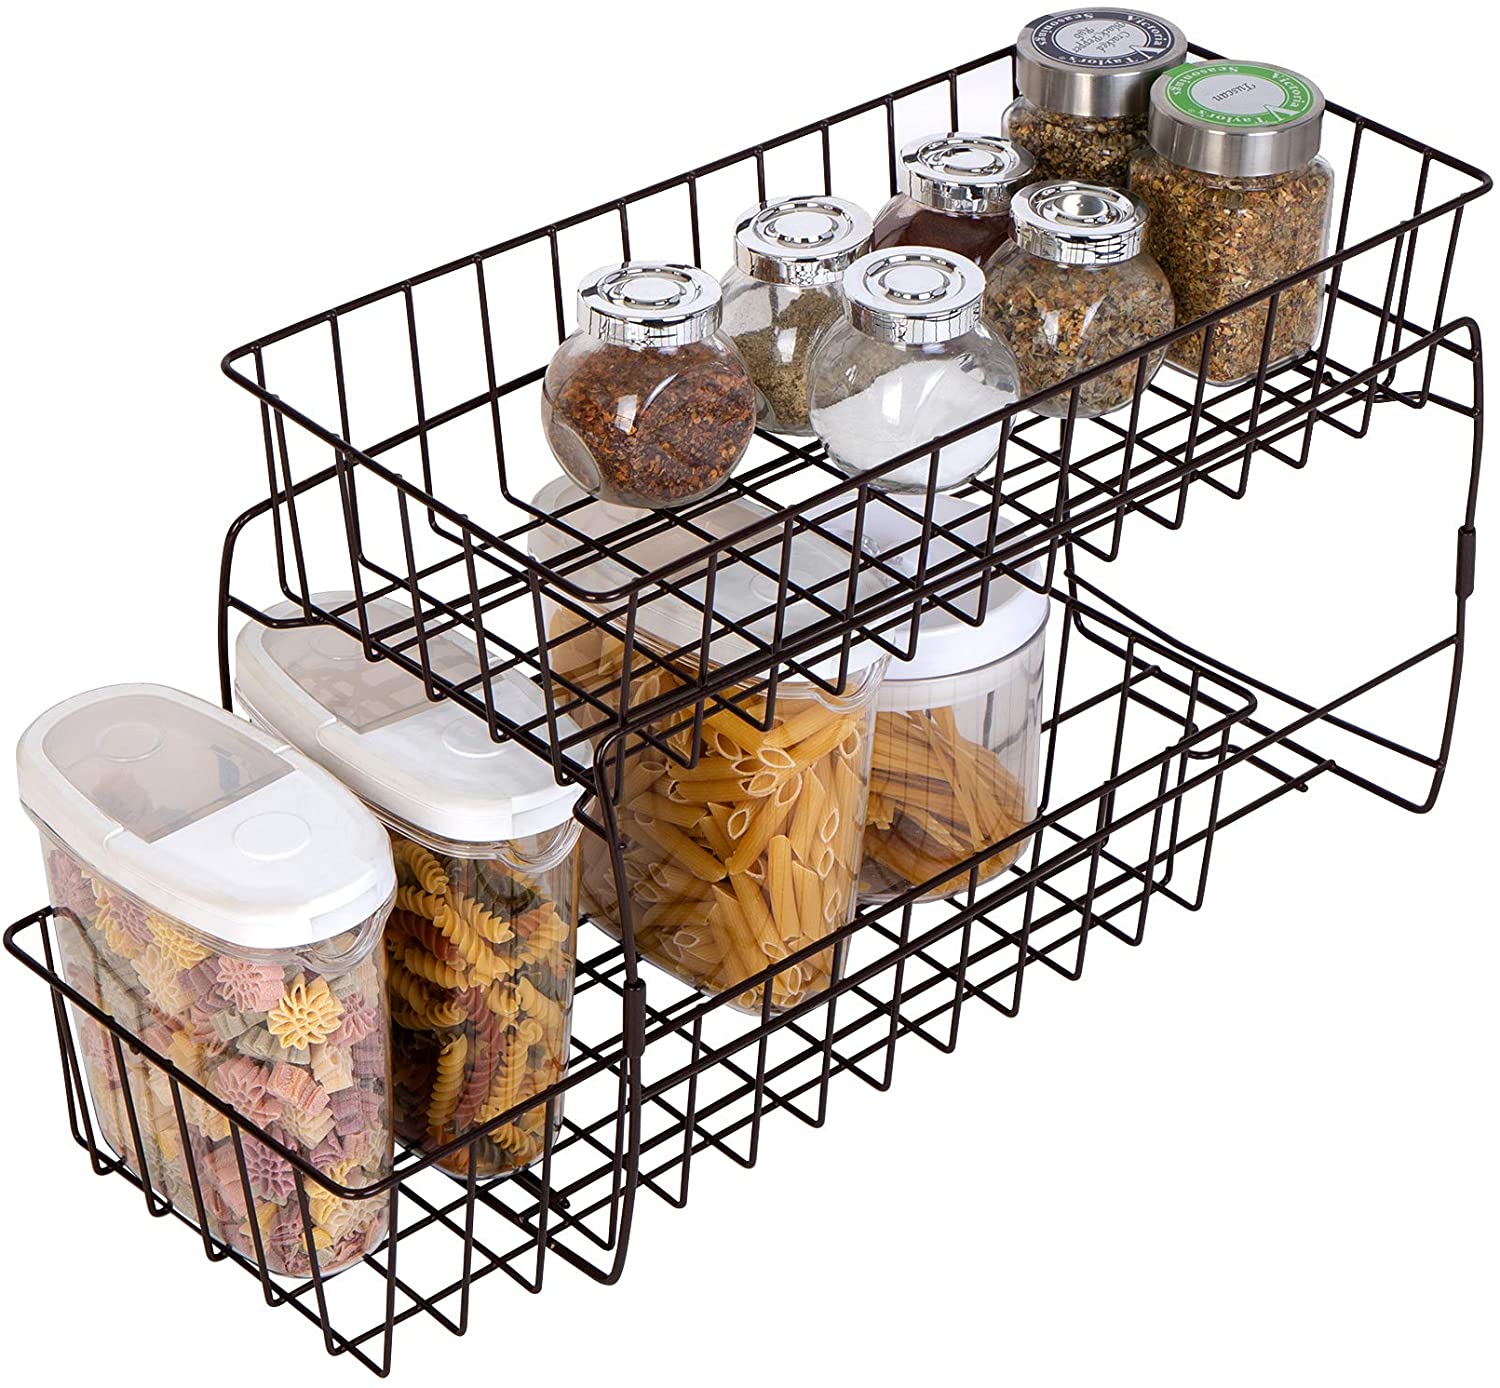 2-Tier Stackable Pull Out Baskets - White - Smart Design® 7